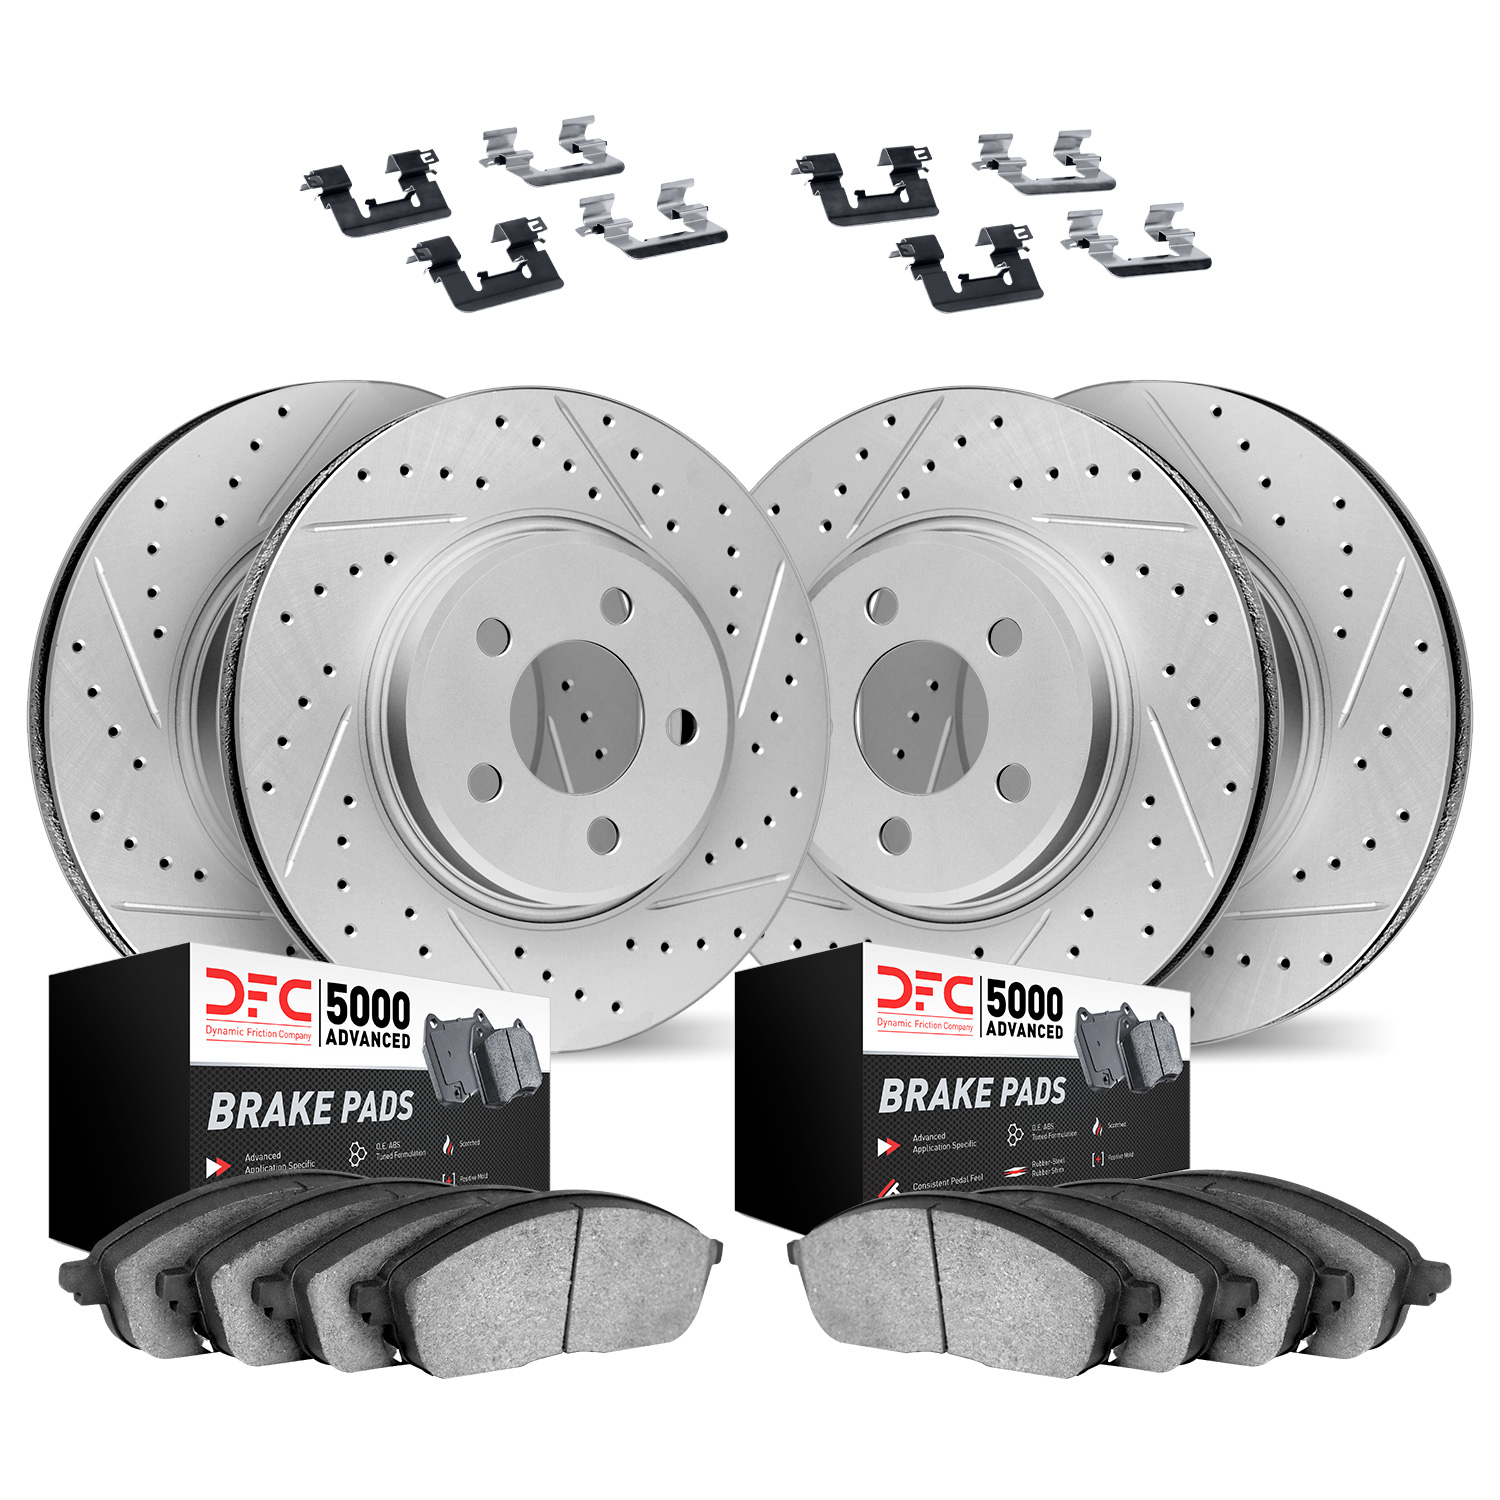 2514-13006 Geoperformance Drilled/Slotted Rotors w/5000 Advanced Brake Pads Kit & Hardware, 2005-2007 Subaru, Position: Front an